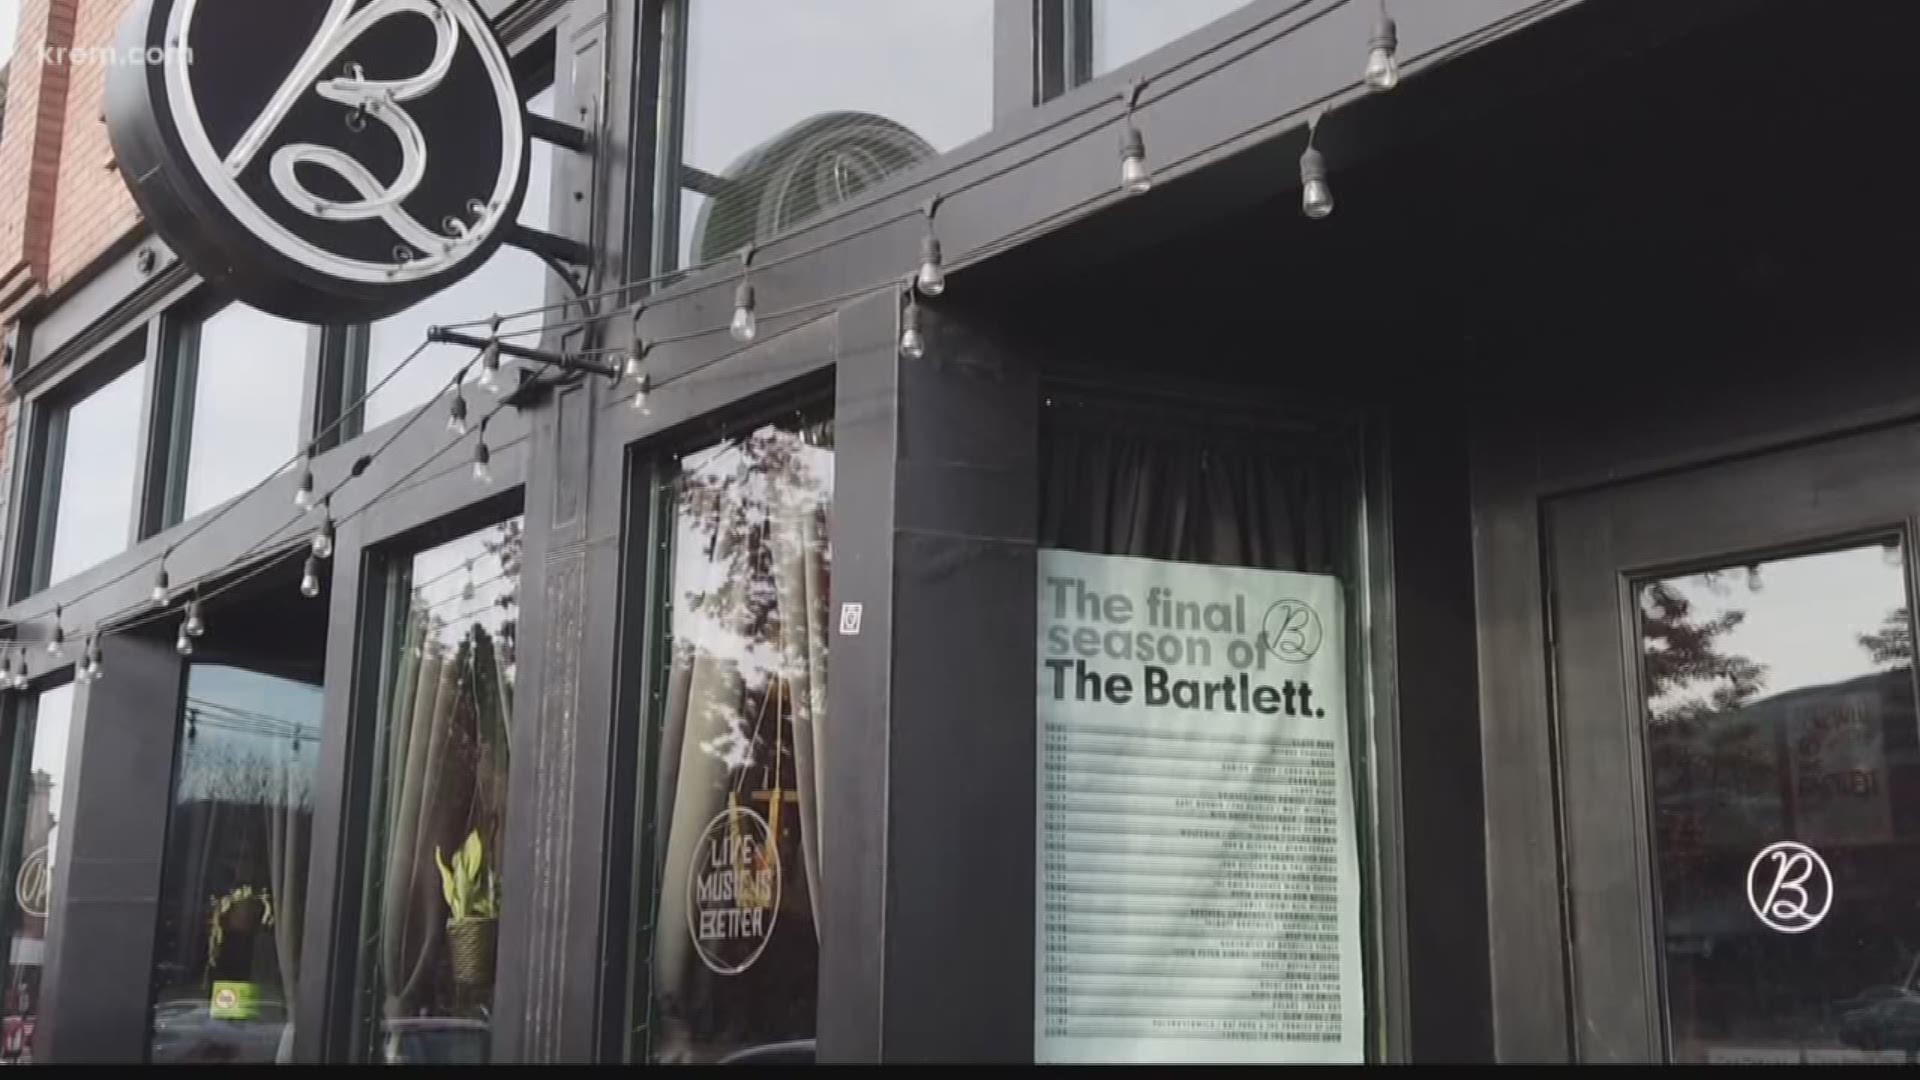 Local musicians are saying goodbye to one of their favorite venues in Spokane with a farewell performance. The Bartlett is closing their doors tonight.